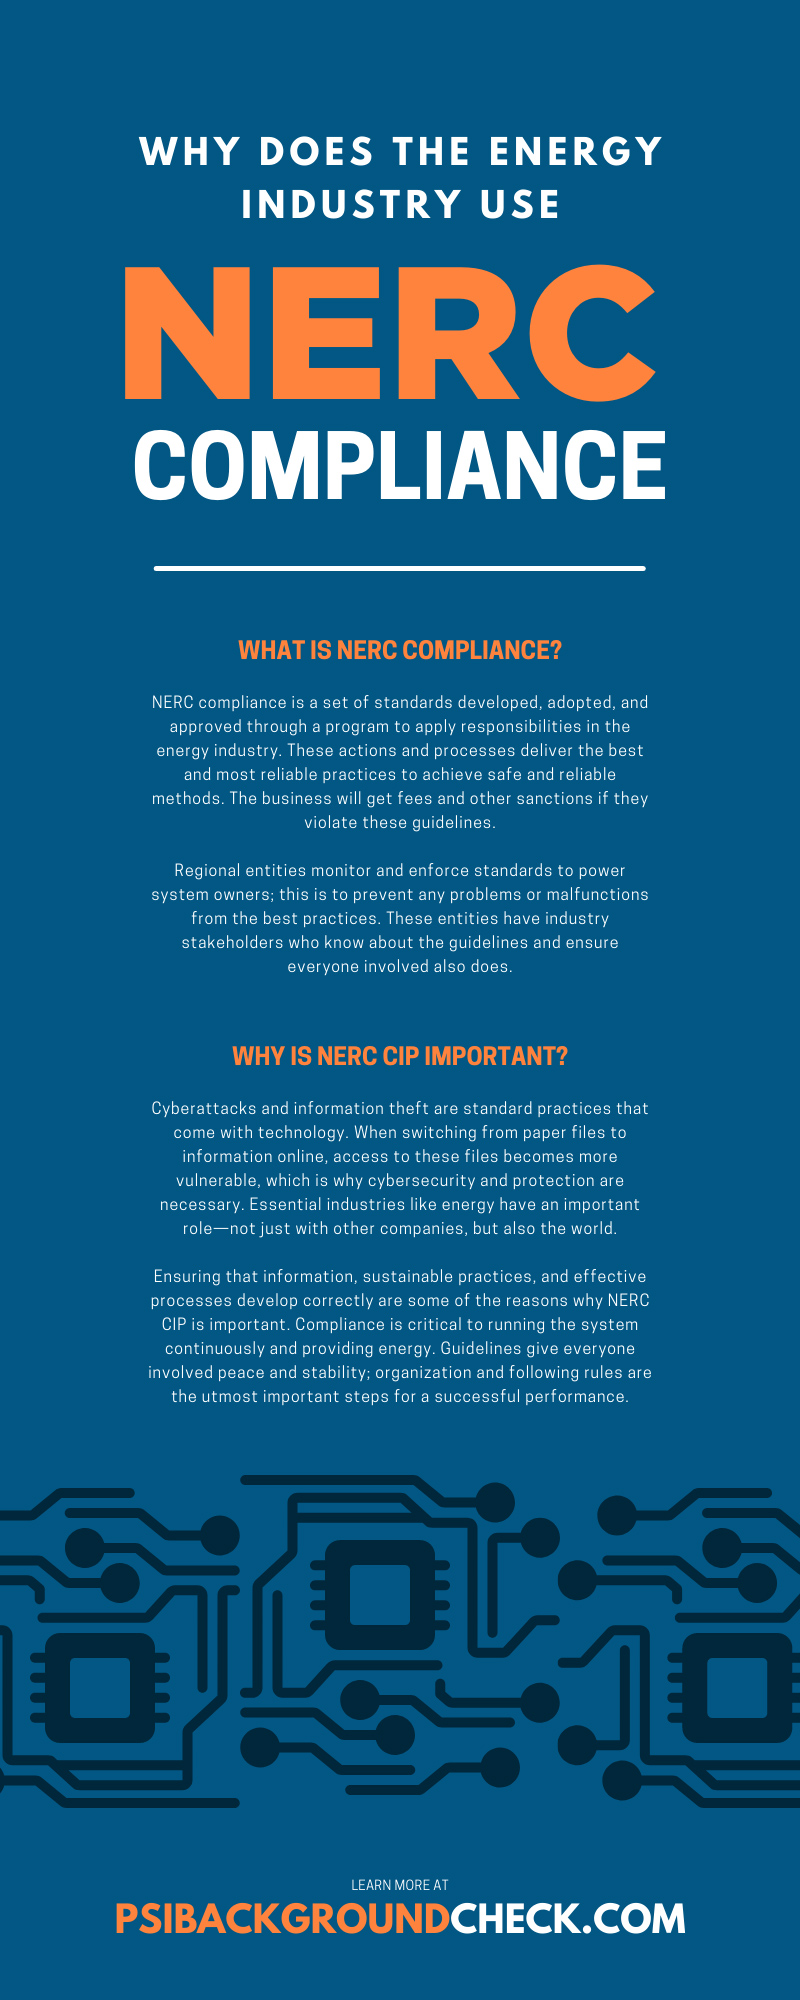 Why Does the Energy Industry Use NERC Compliance